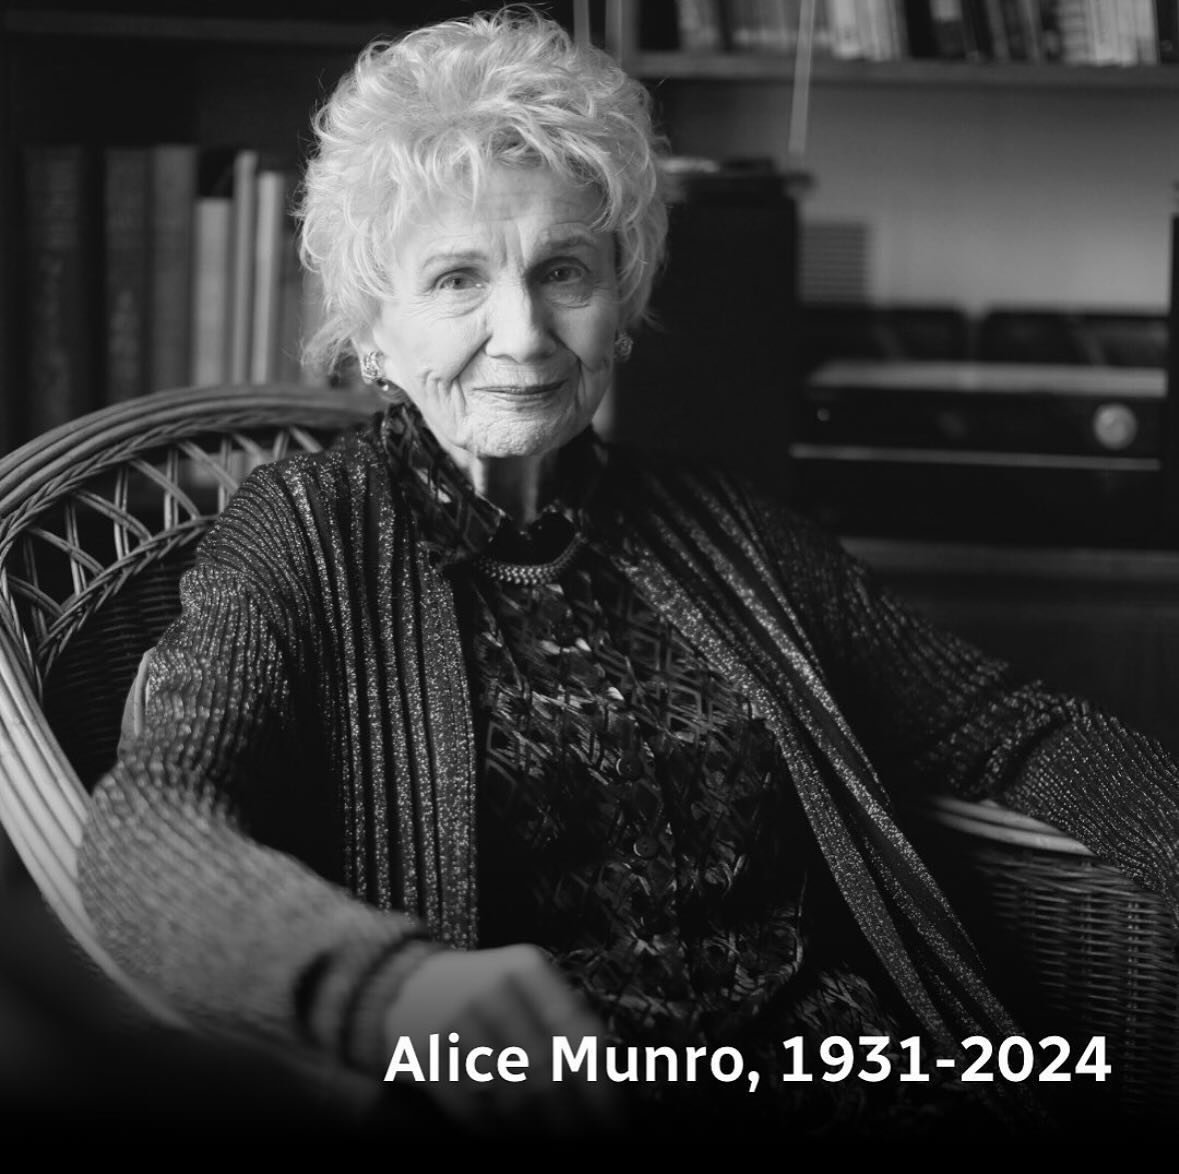 &ldquo;Alice Munro, the revered Canadian author who started writing short stories because she did not think she had the time or the talent to master novels, then stubbornly dedicated her long career to churning out psychologically dense stories that 